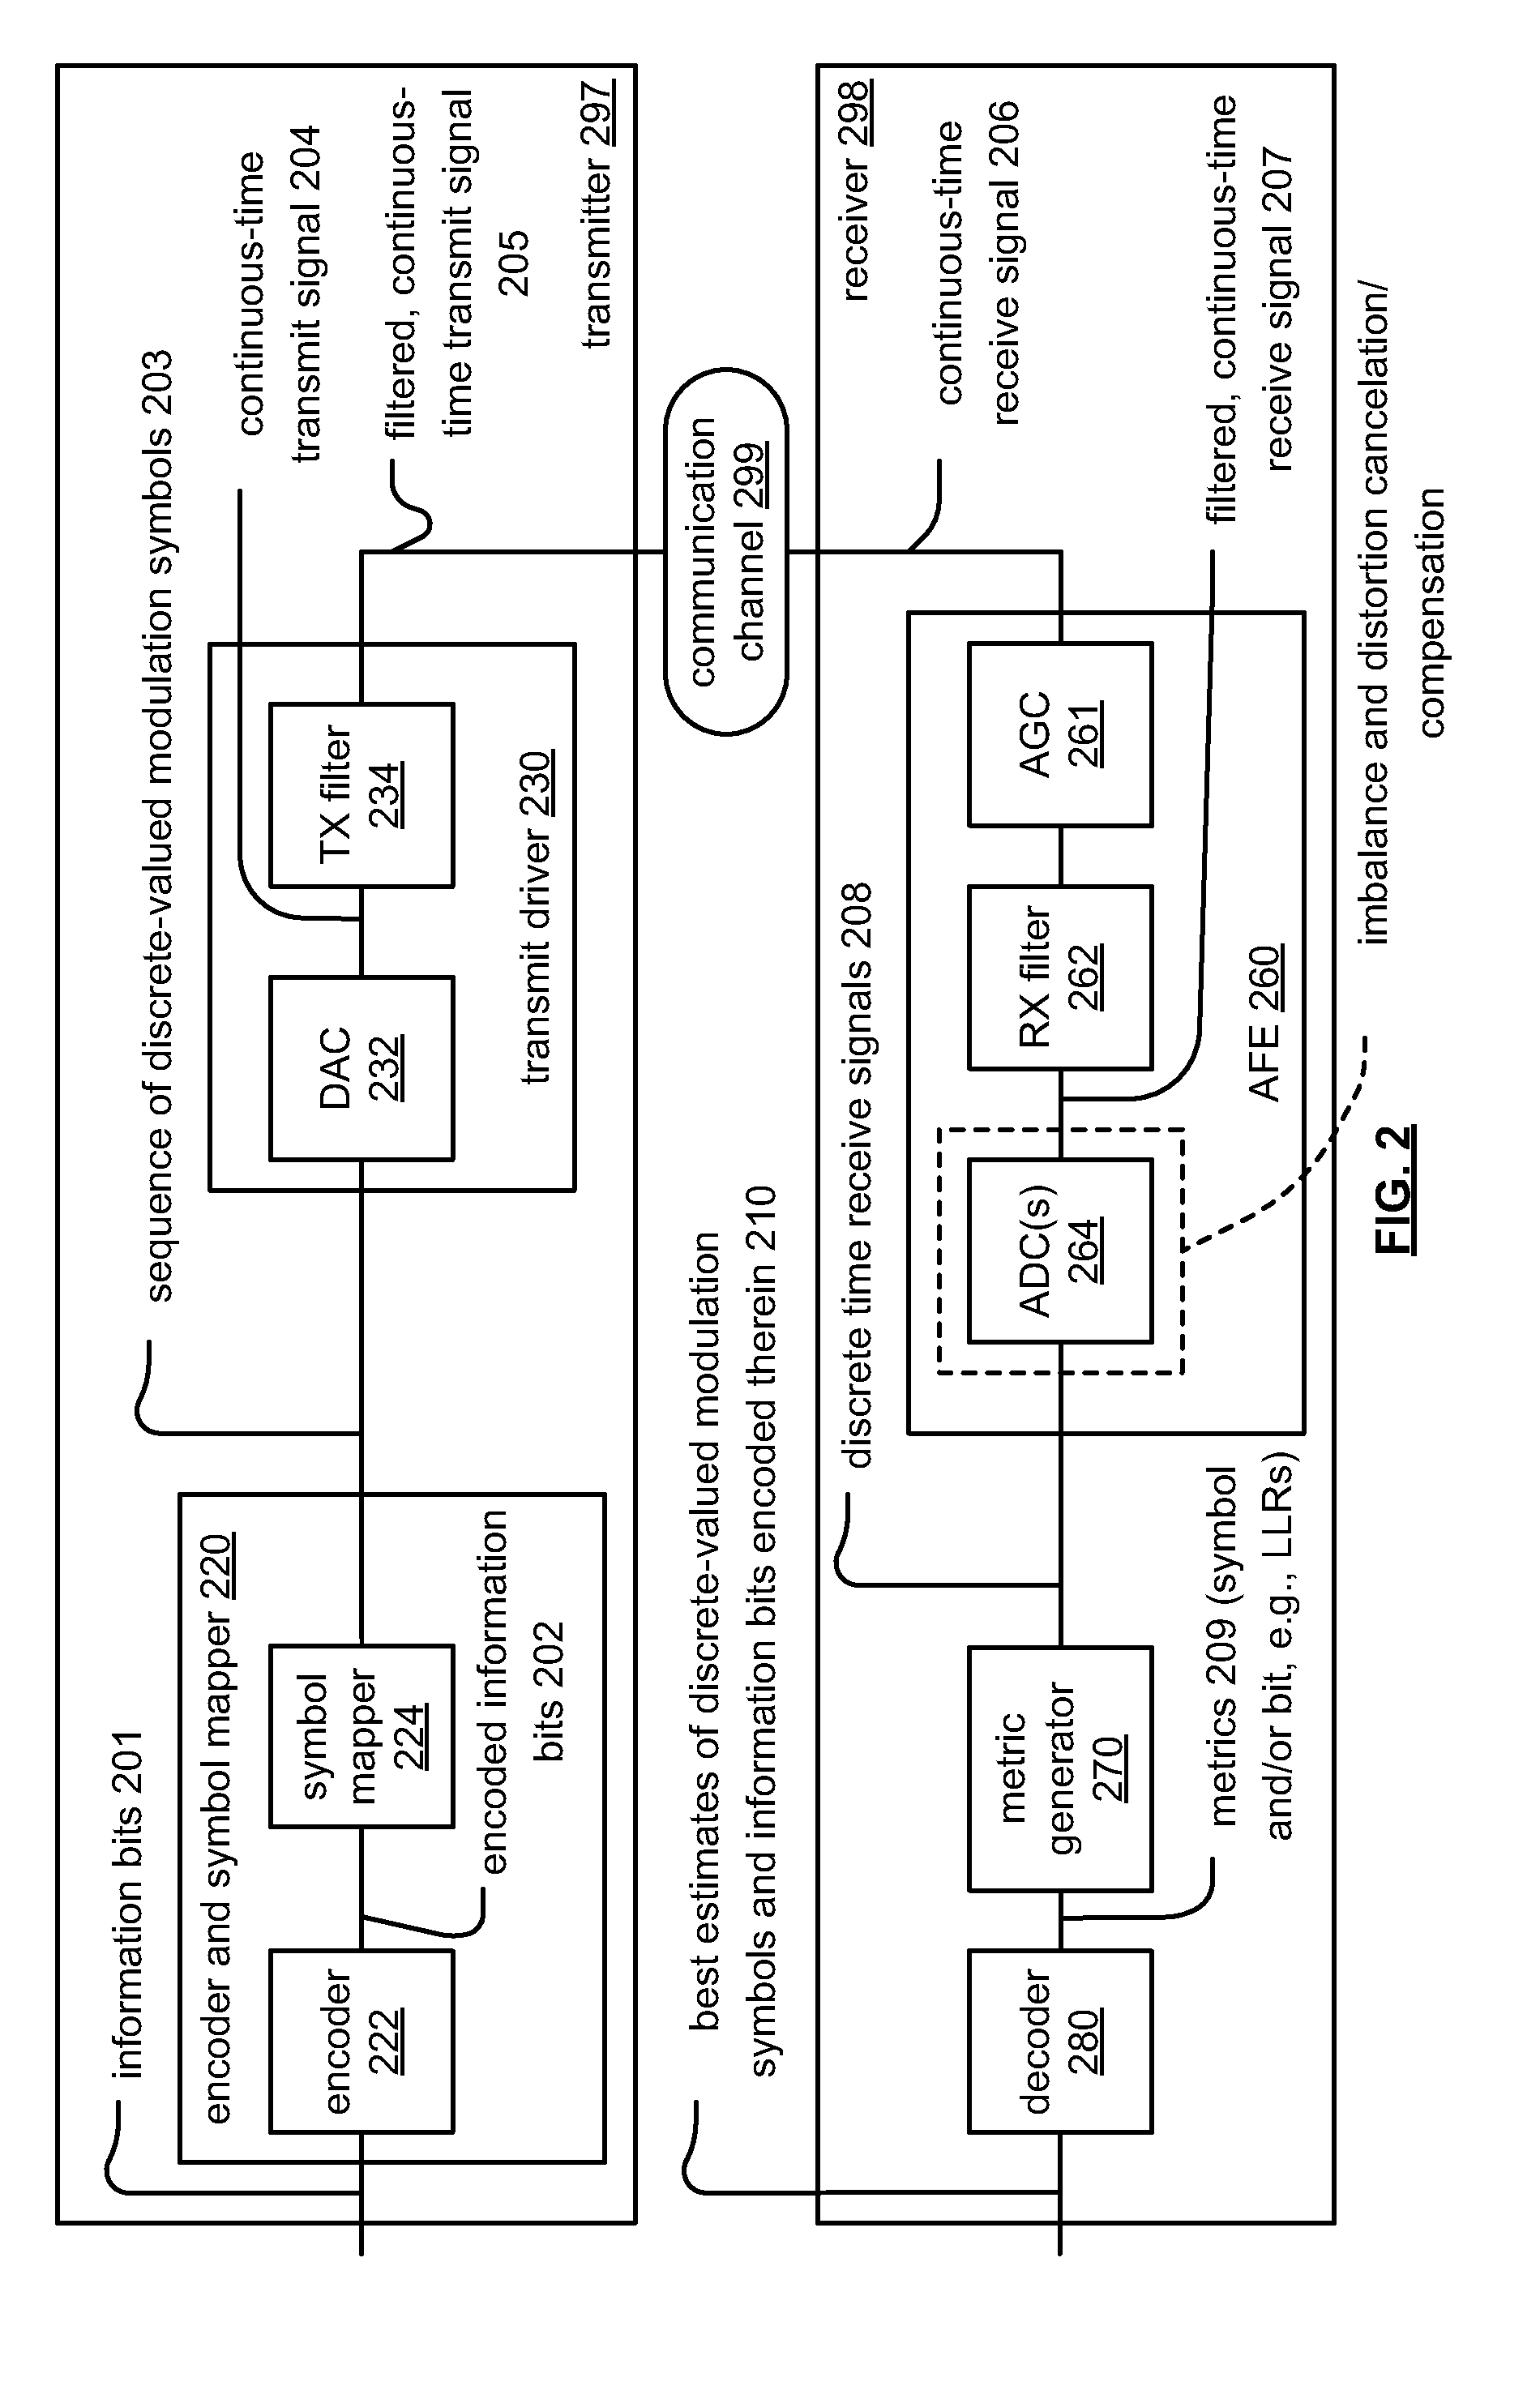 Imbalance and distortion cancellation for composite analog to digital converter (ADC)